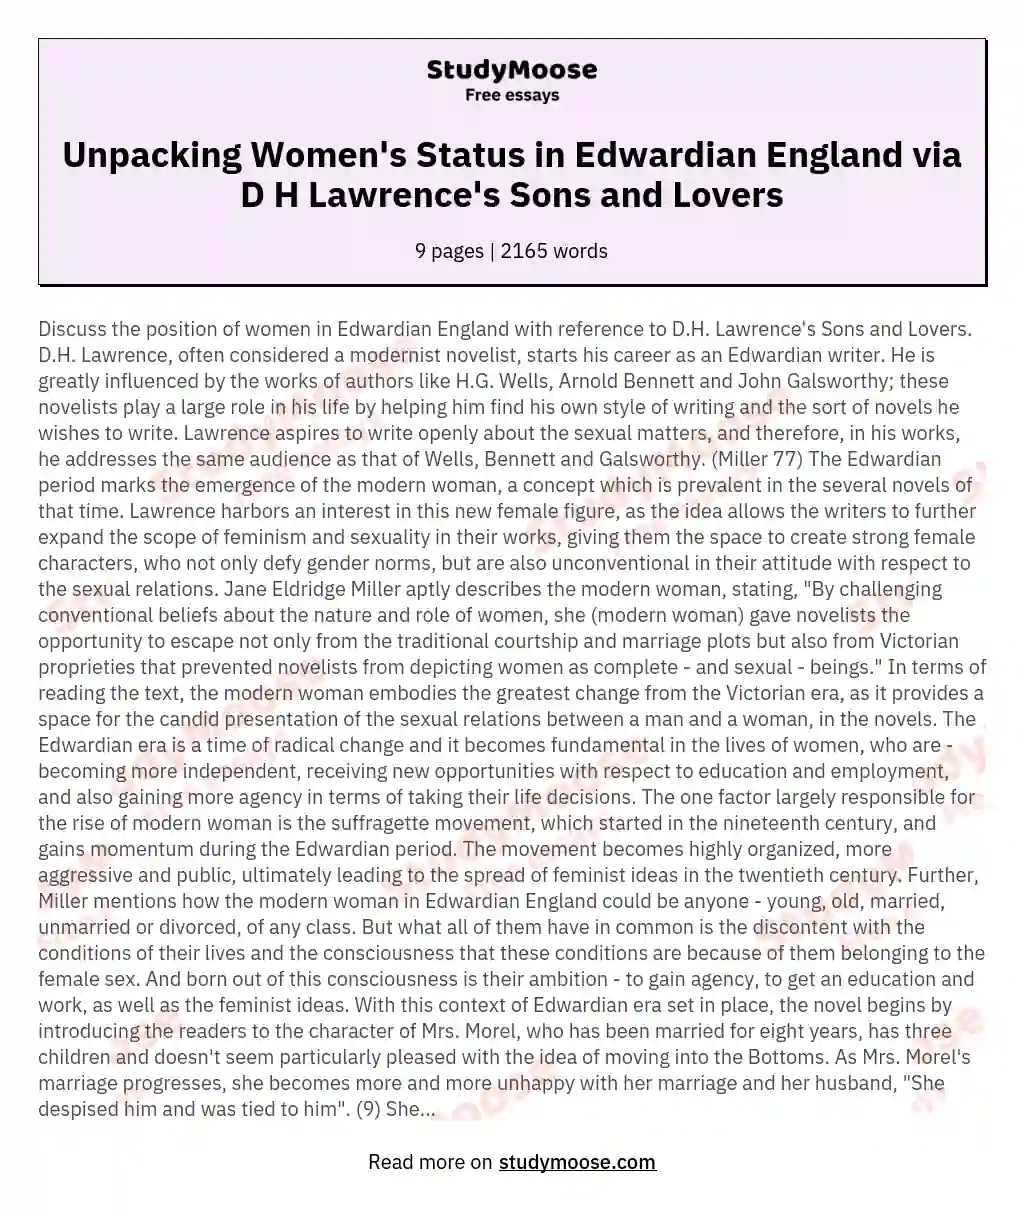 Unpacking Women's Status in Edwardian England via D H Lawrence's Sons and Lovers essay